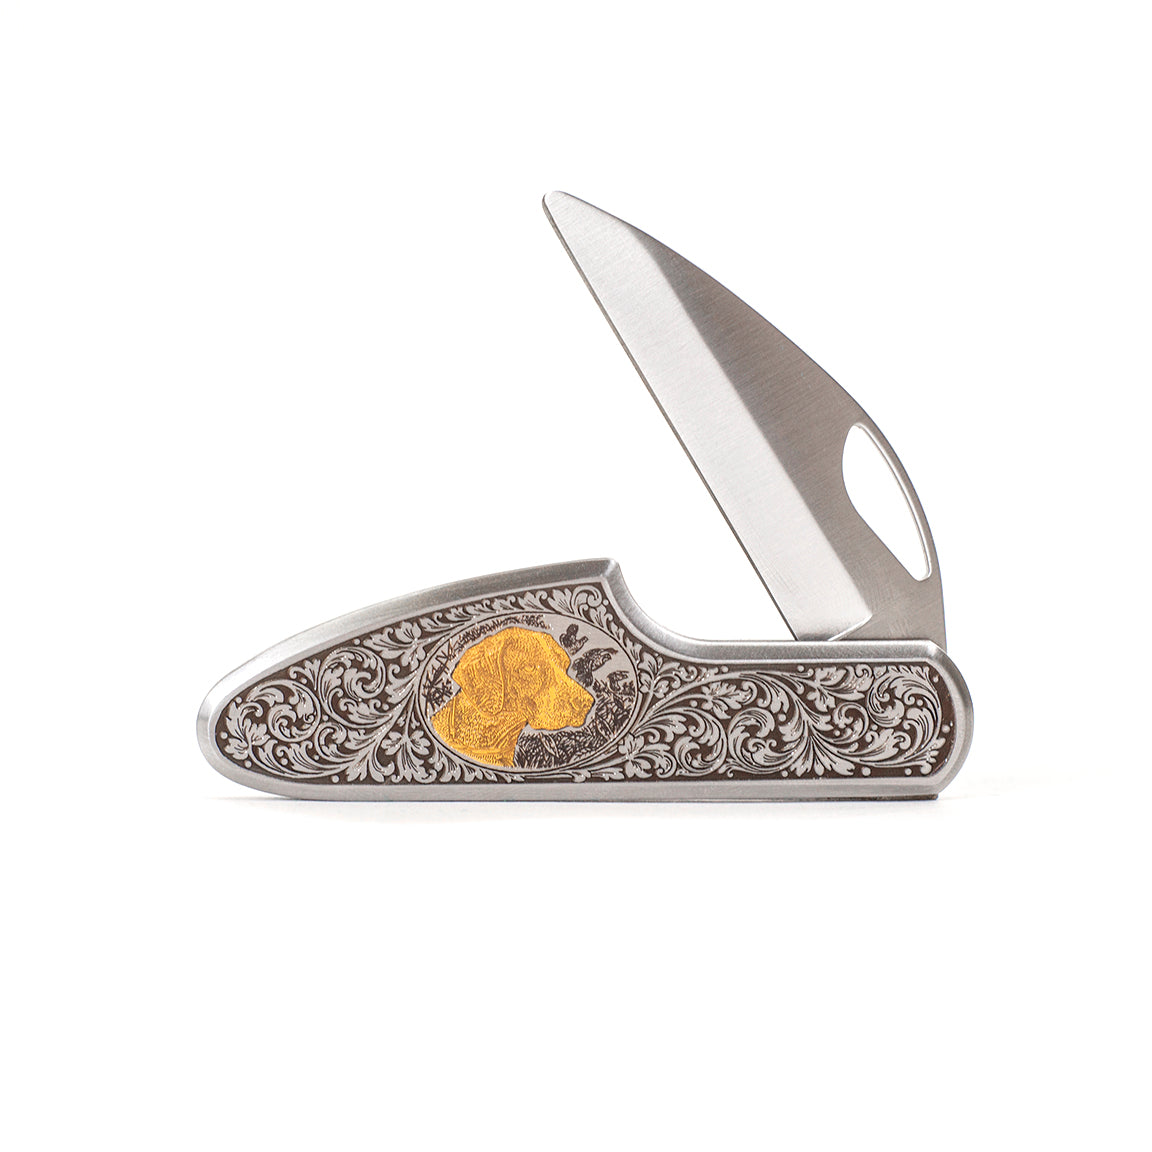 Kevin's Pointer Sidelock Knife-Knives & Tools-Gold Inlay-Kevin's Fine Outdoor Gear & Apparel